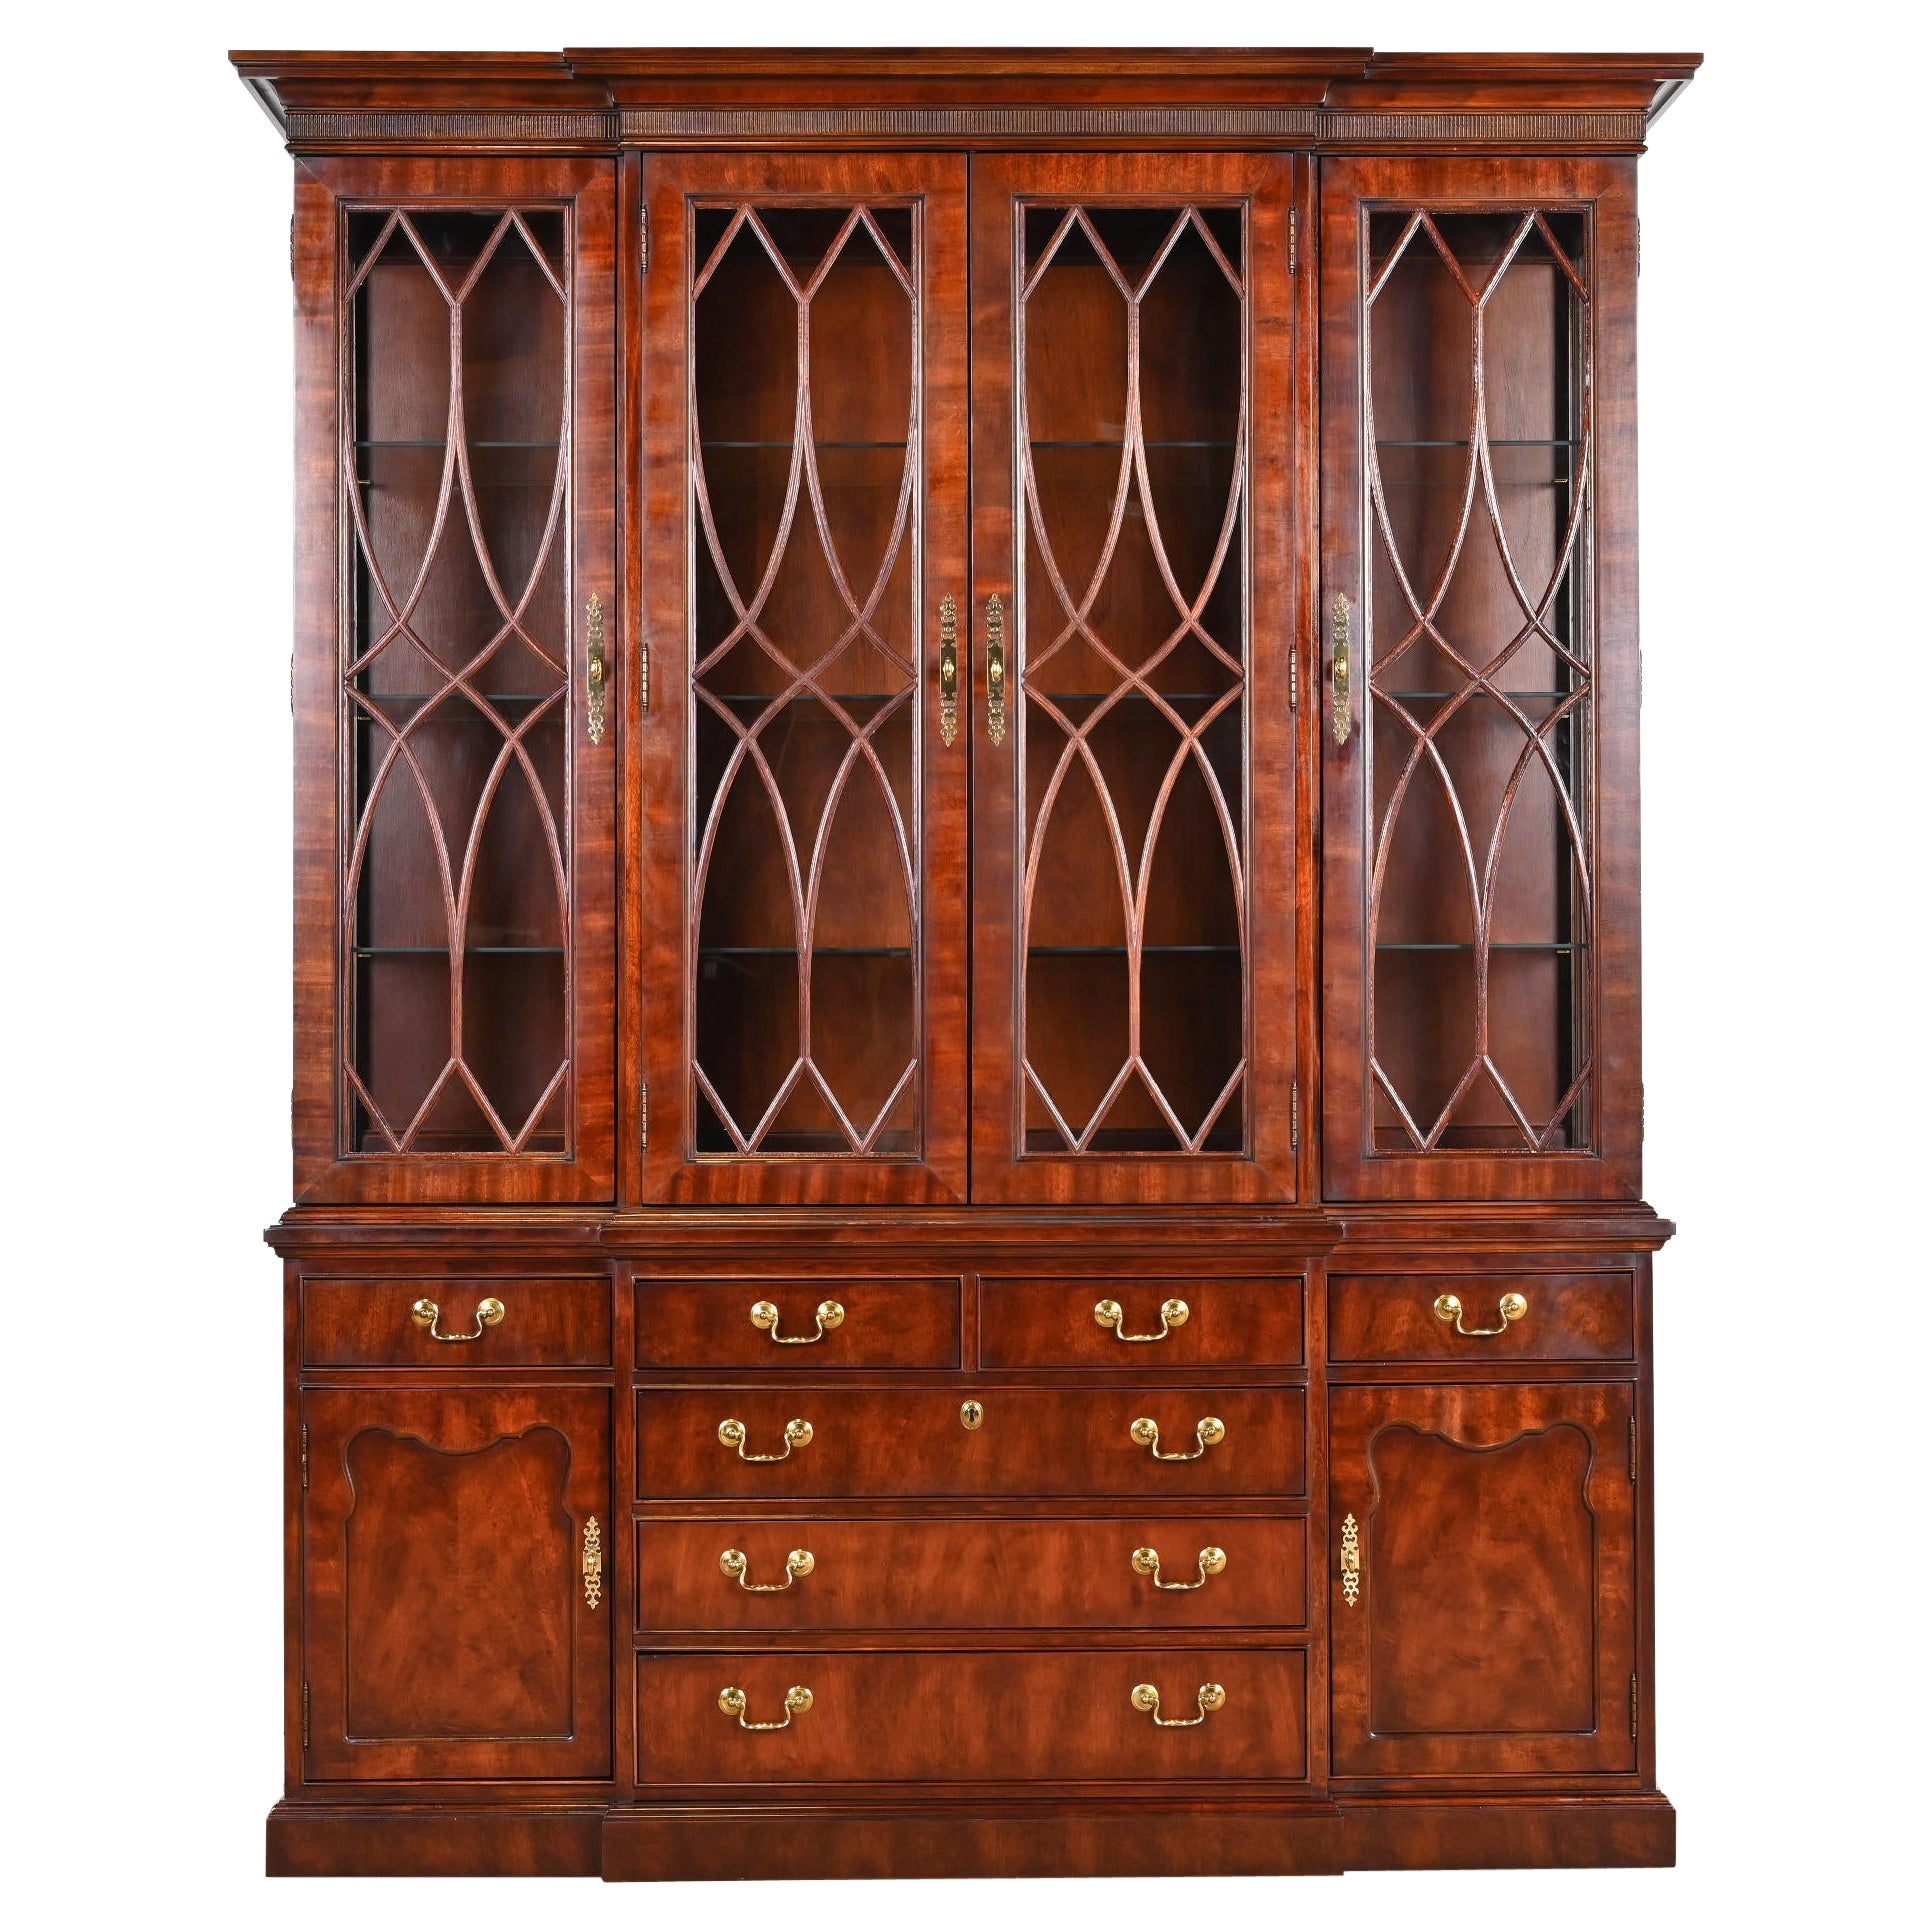 Georgian Carved Mahogany Lighted Breakfront Bookcase Cabinet by Thomasville For Sale